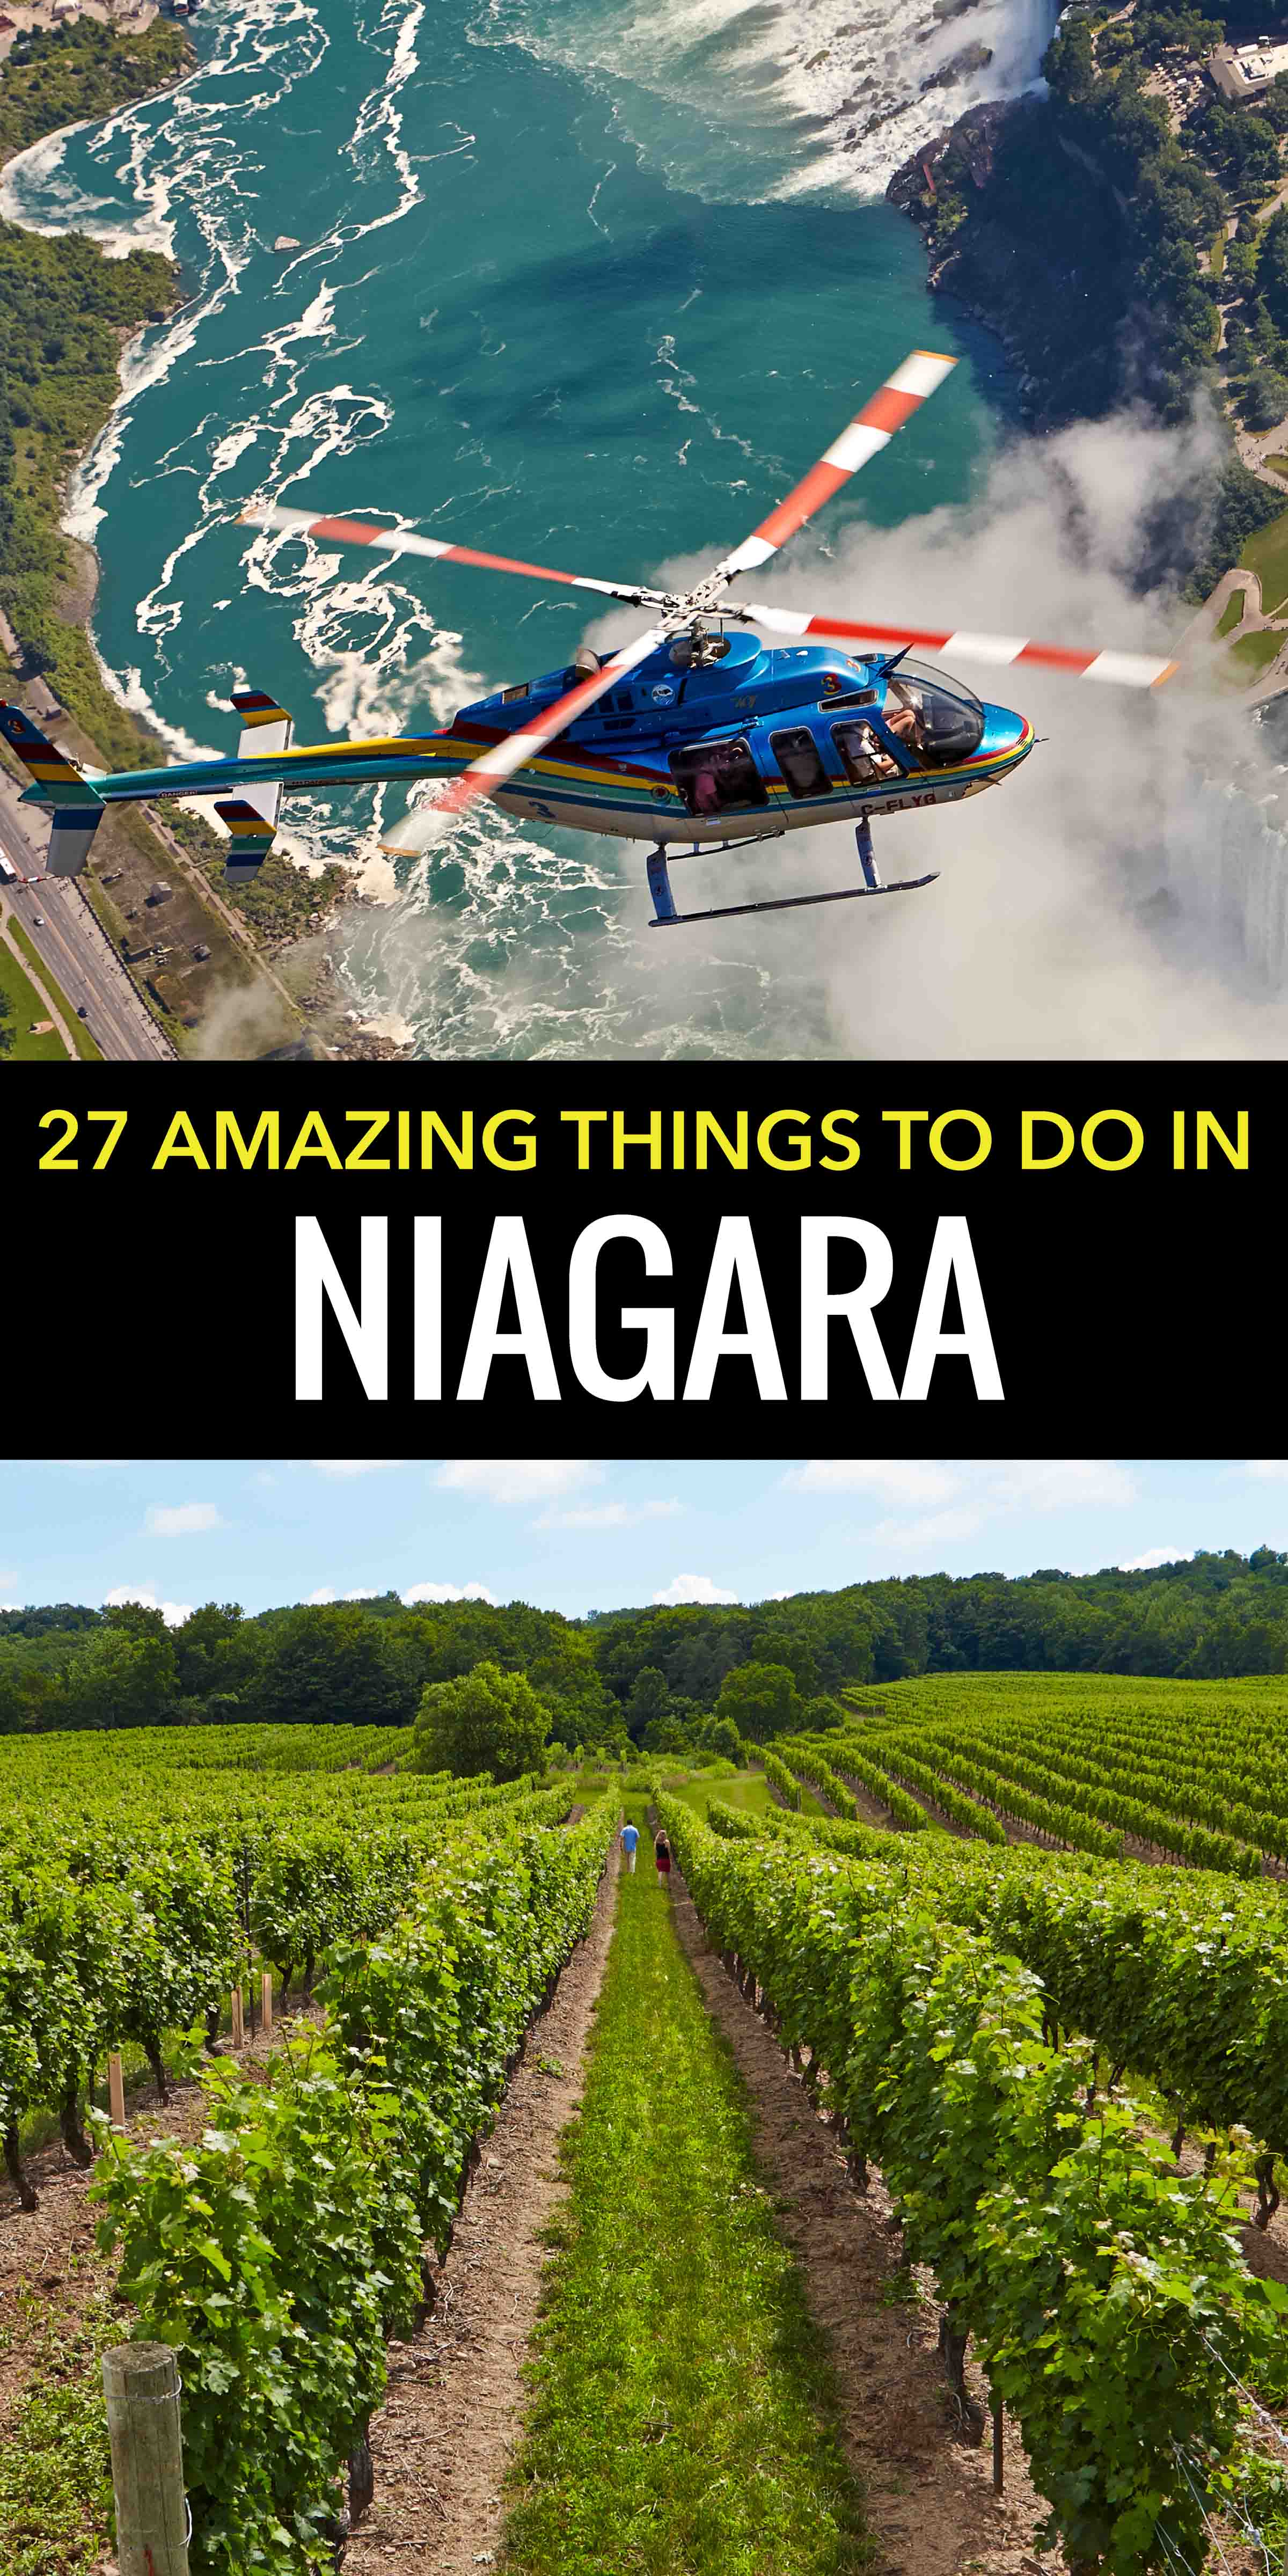 Discover 27 amazing things to do in Niagara, Canada this spring.